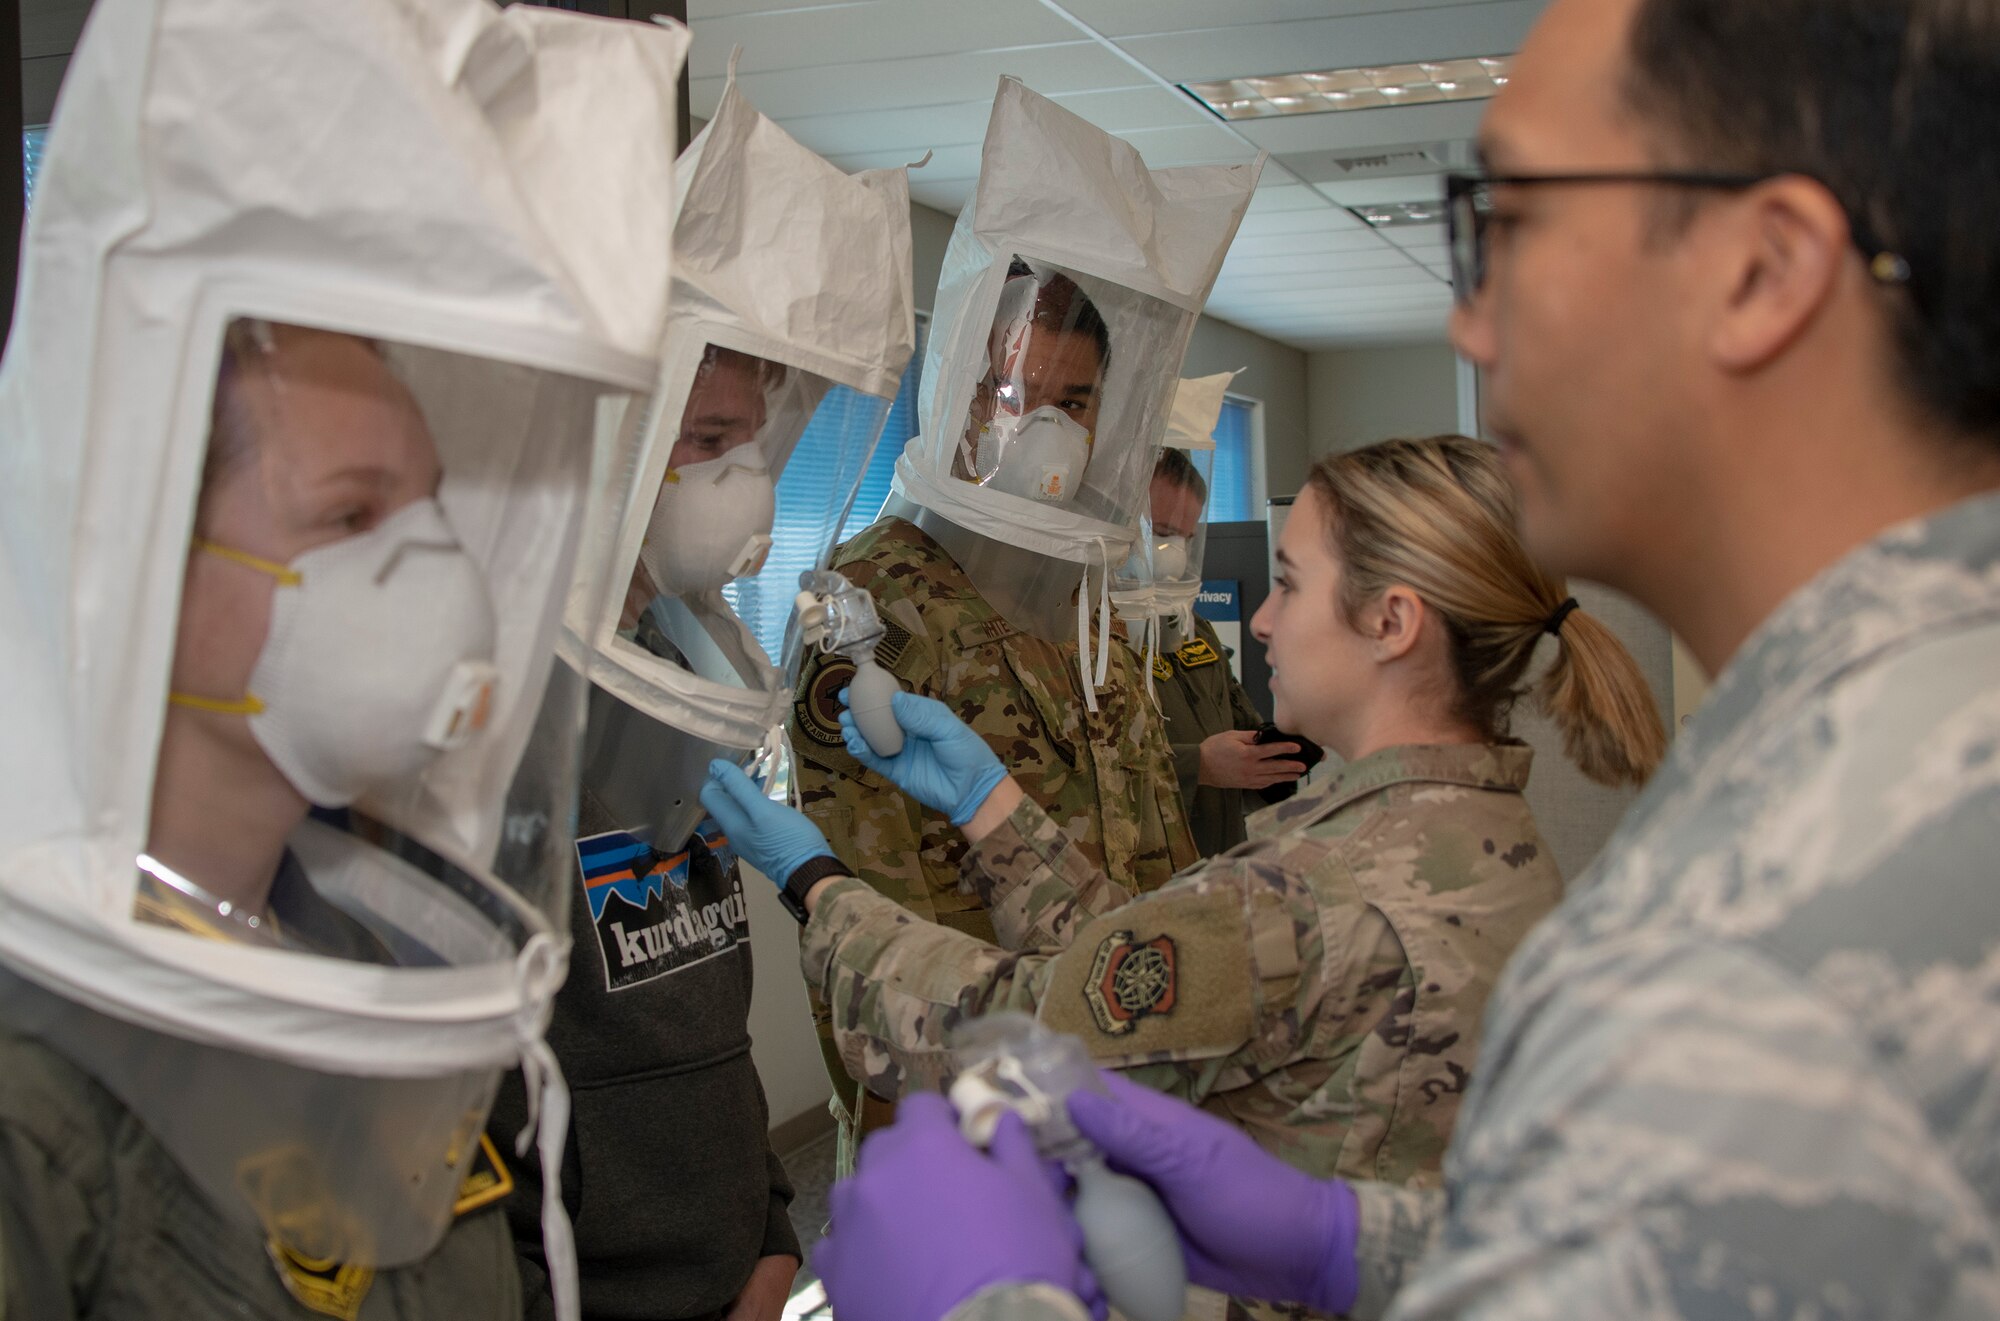 60th Aerospace Medicine Squadron Bioenvironmental Engineering Flight technicians perform N95 mask fit tests on aircrew at Travis Air Force Base, California, April 10, 2020. The bioenvironmental engineering flights conduct respirator and gas mask fit tests to protect Airmen and maintain a healthy workforce. They also perform environmental, occupational and radiological surveillance. (U.S. Air Force photo by Heide Couch)